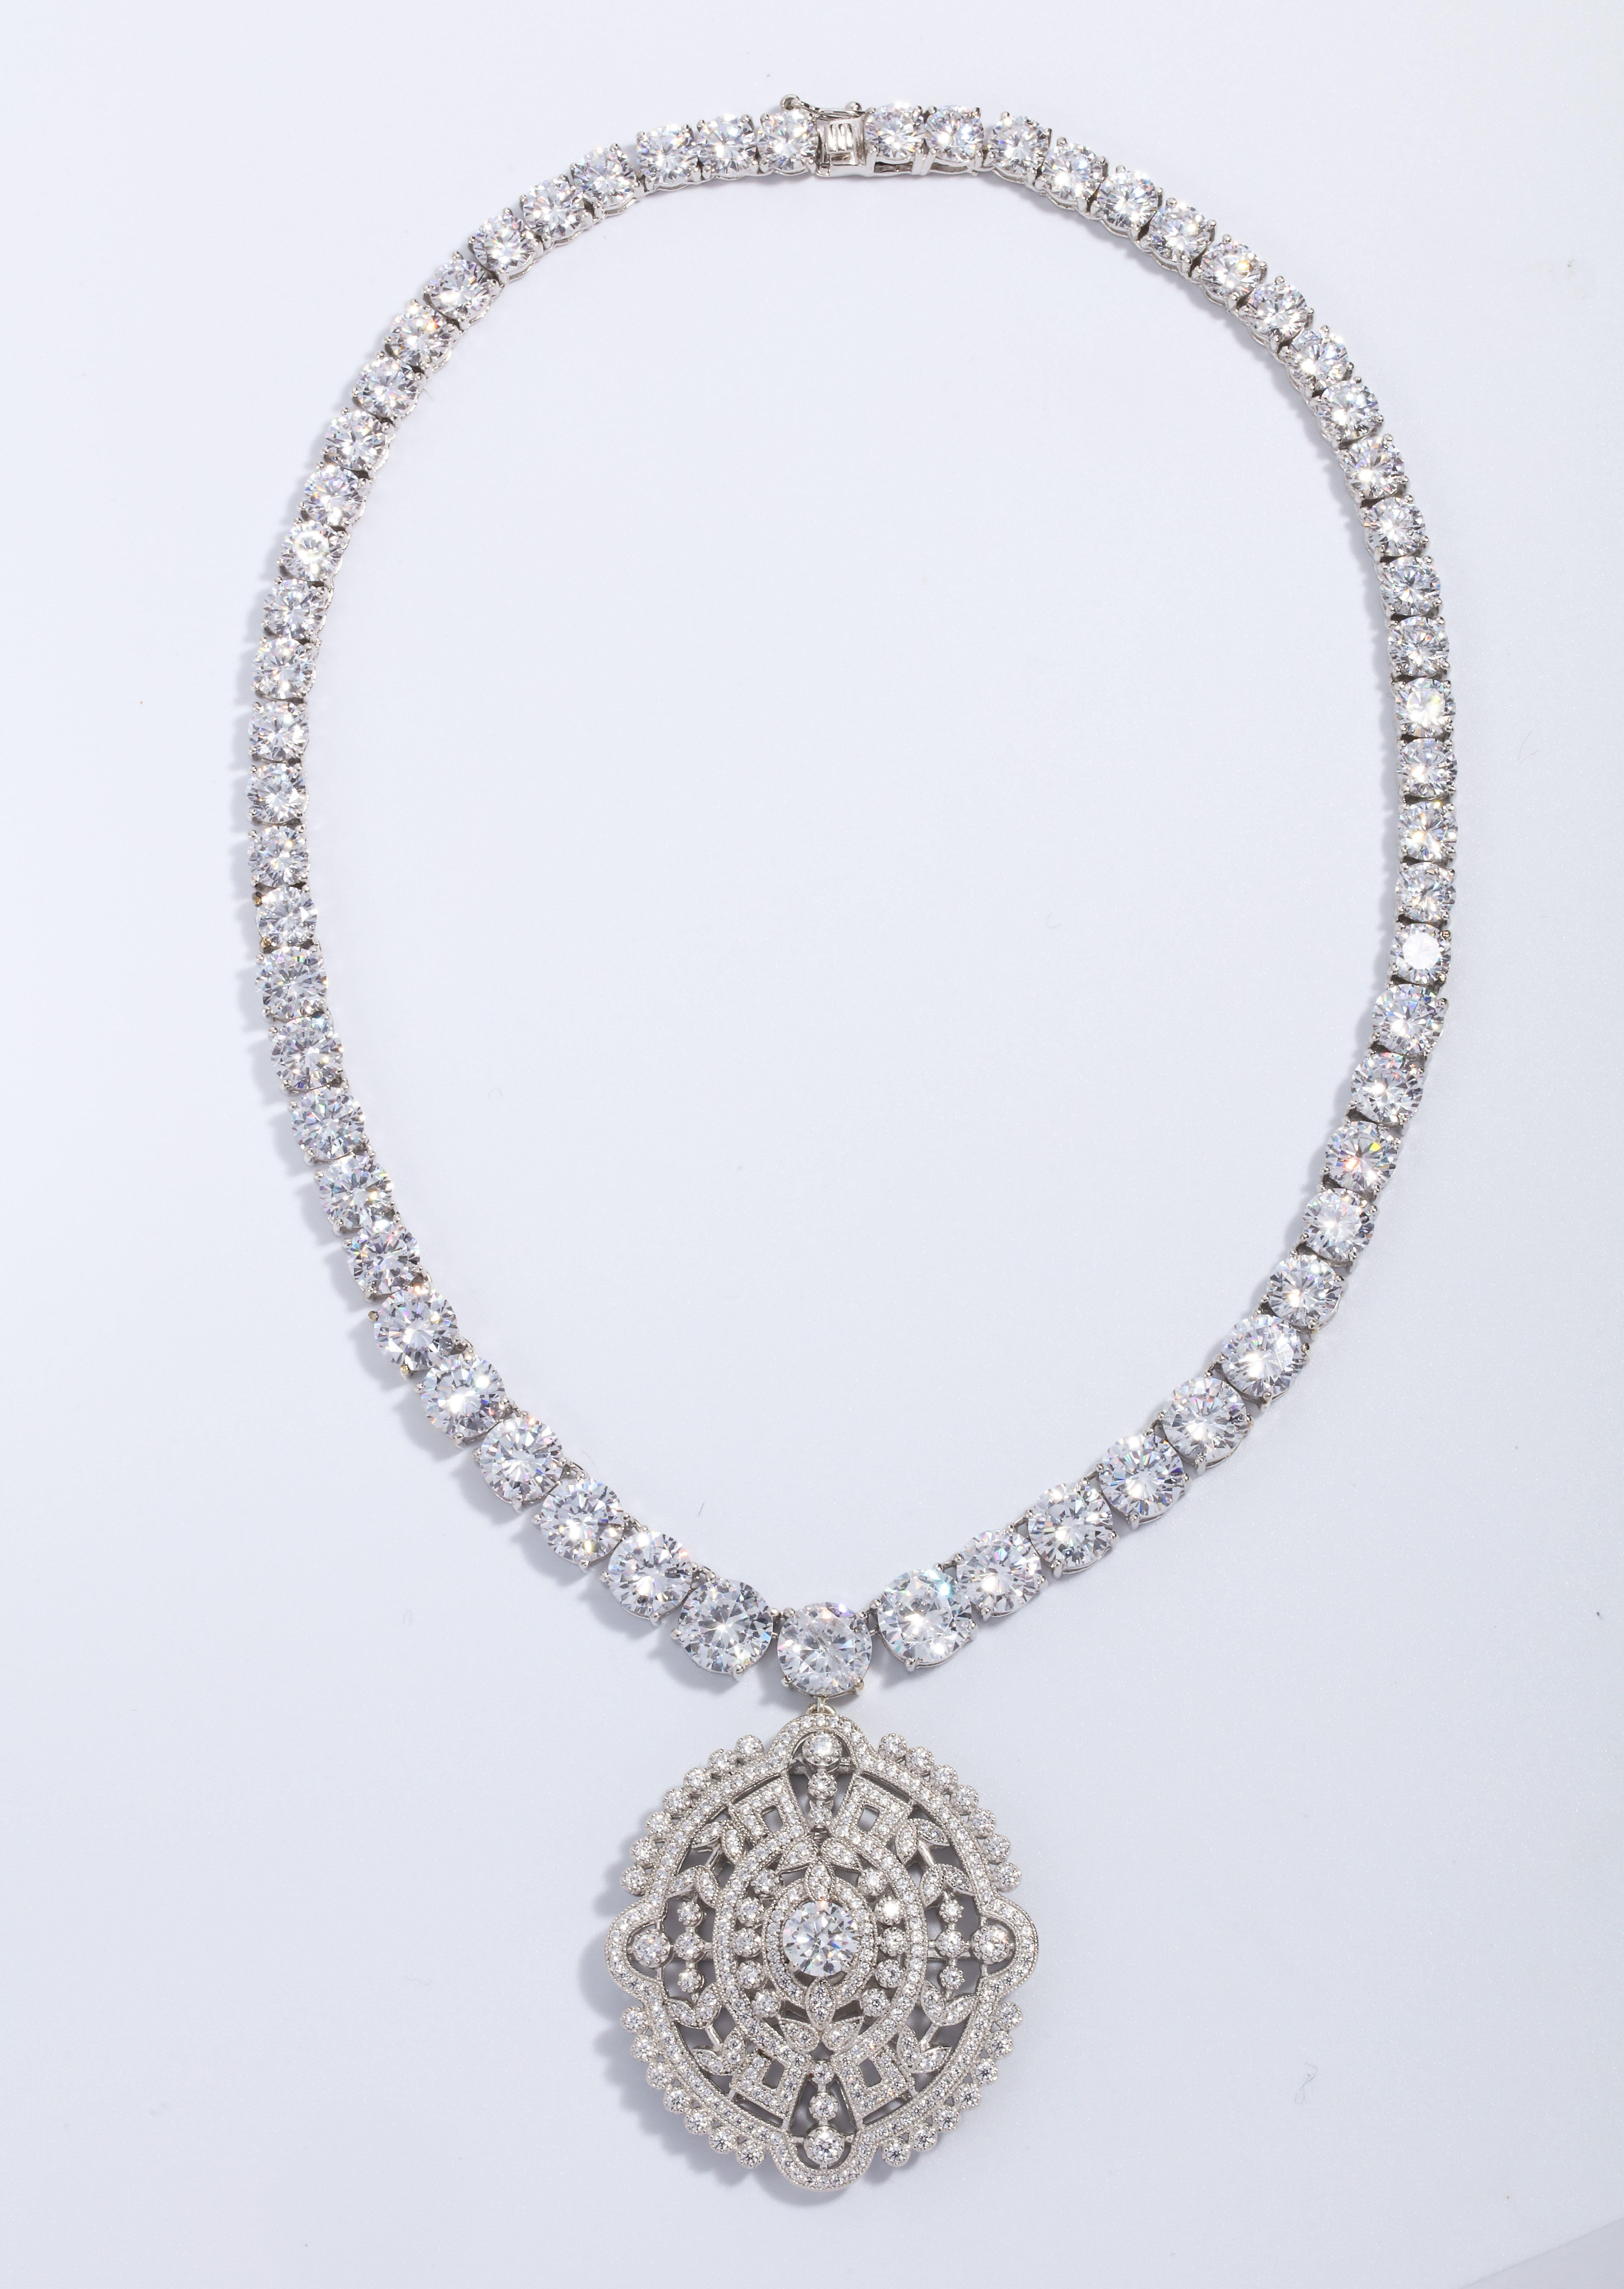 Magnificent Costume Jewelry Edwardian Style Faux Diamond Pendant Necklace
Set with Cubic Zirconia, the necklace is 15 inches long, the pendant is nearly 4.5 inches diameter.
Very elegant and real looking.